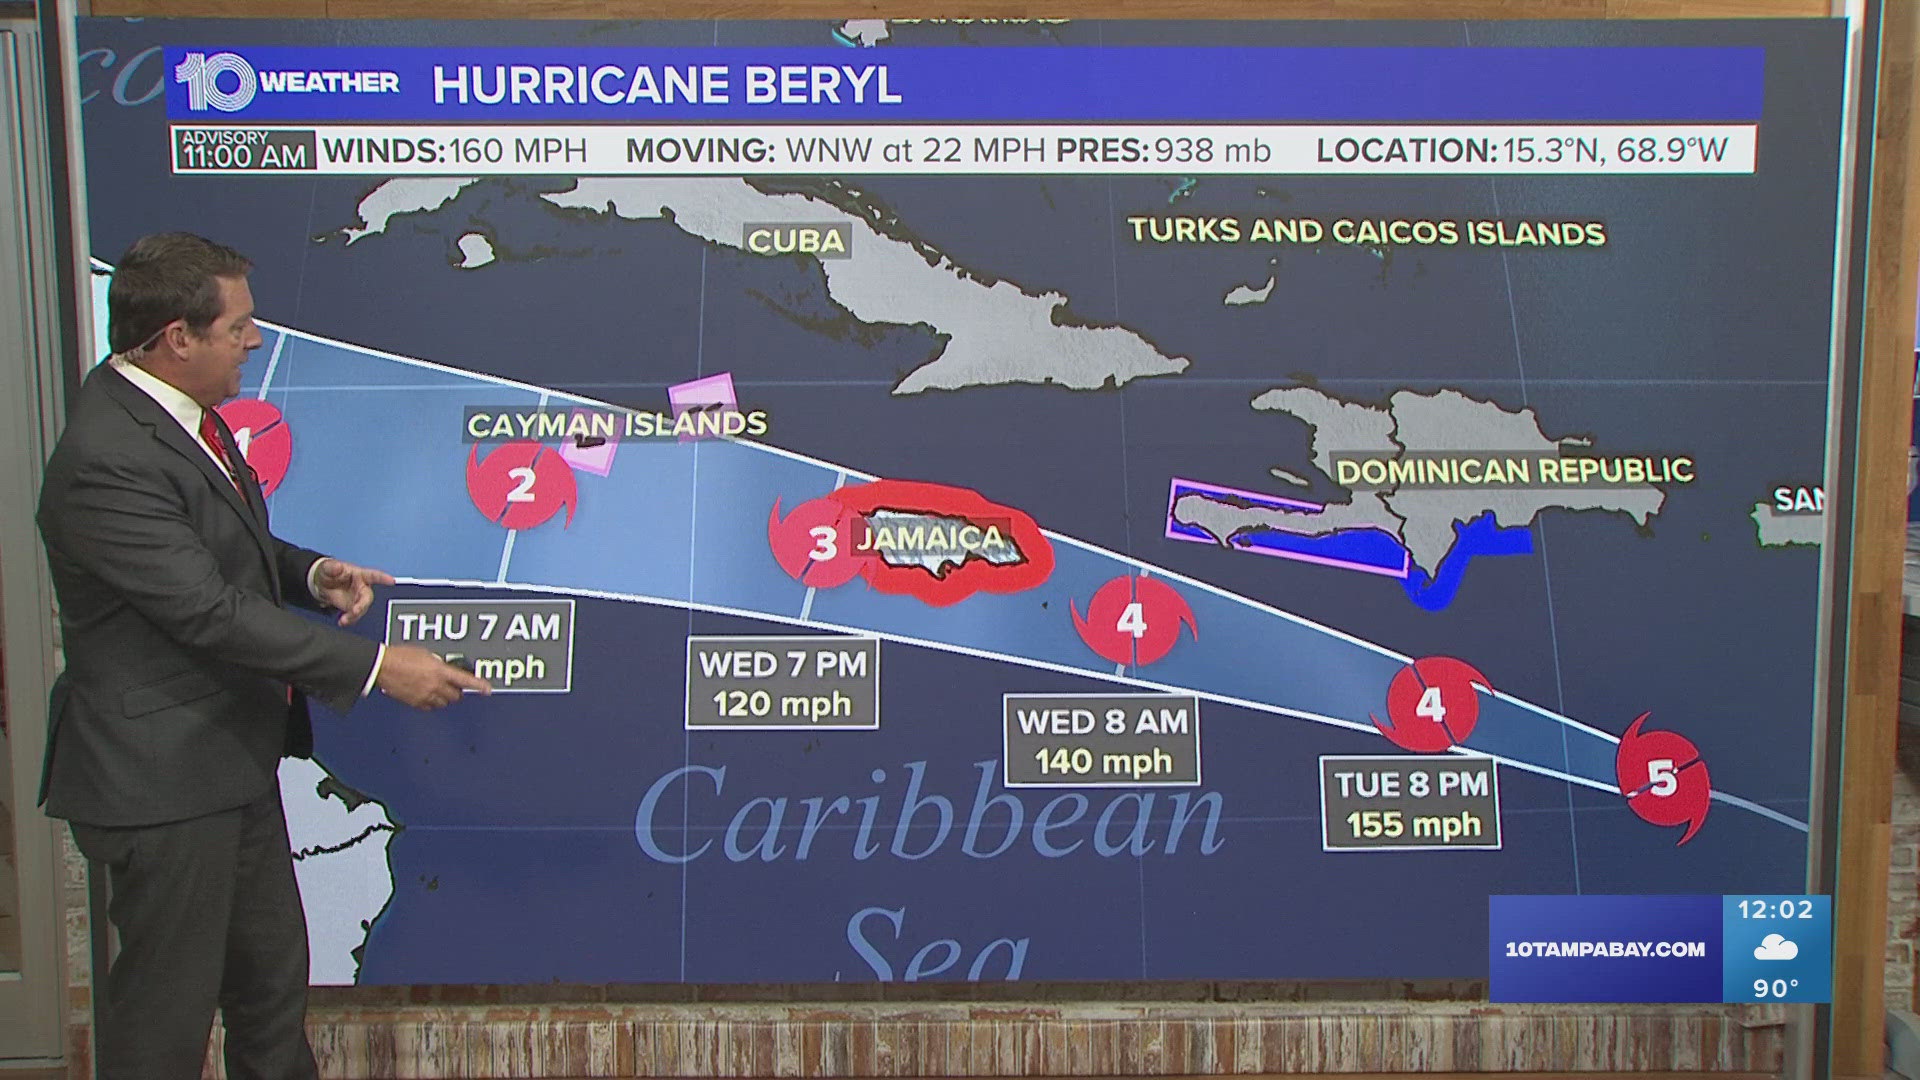 Cruise ships coming out of the Tampa port are also being impacted by Beryl.